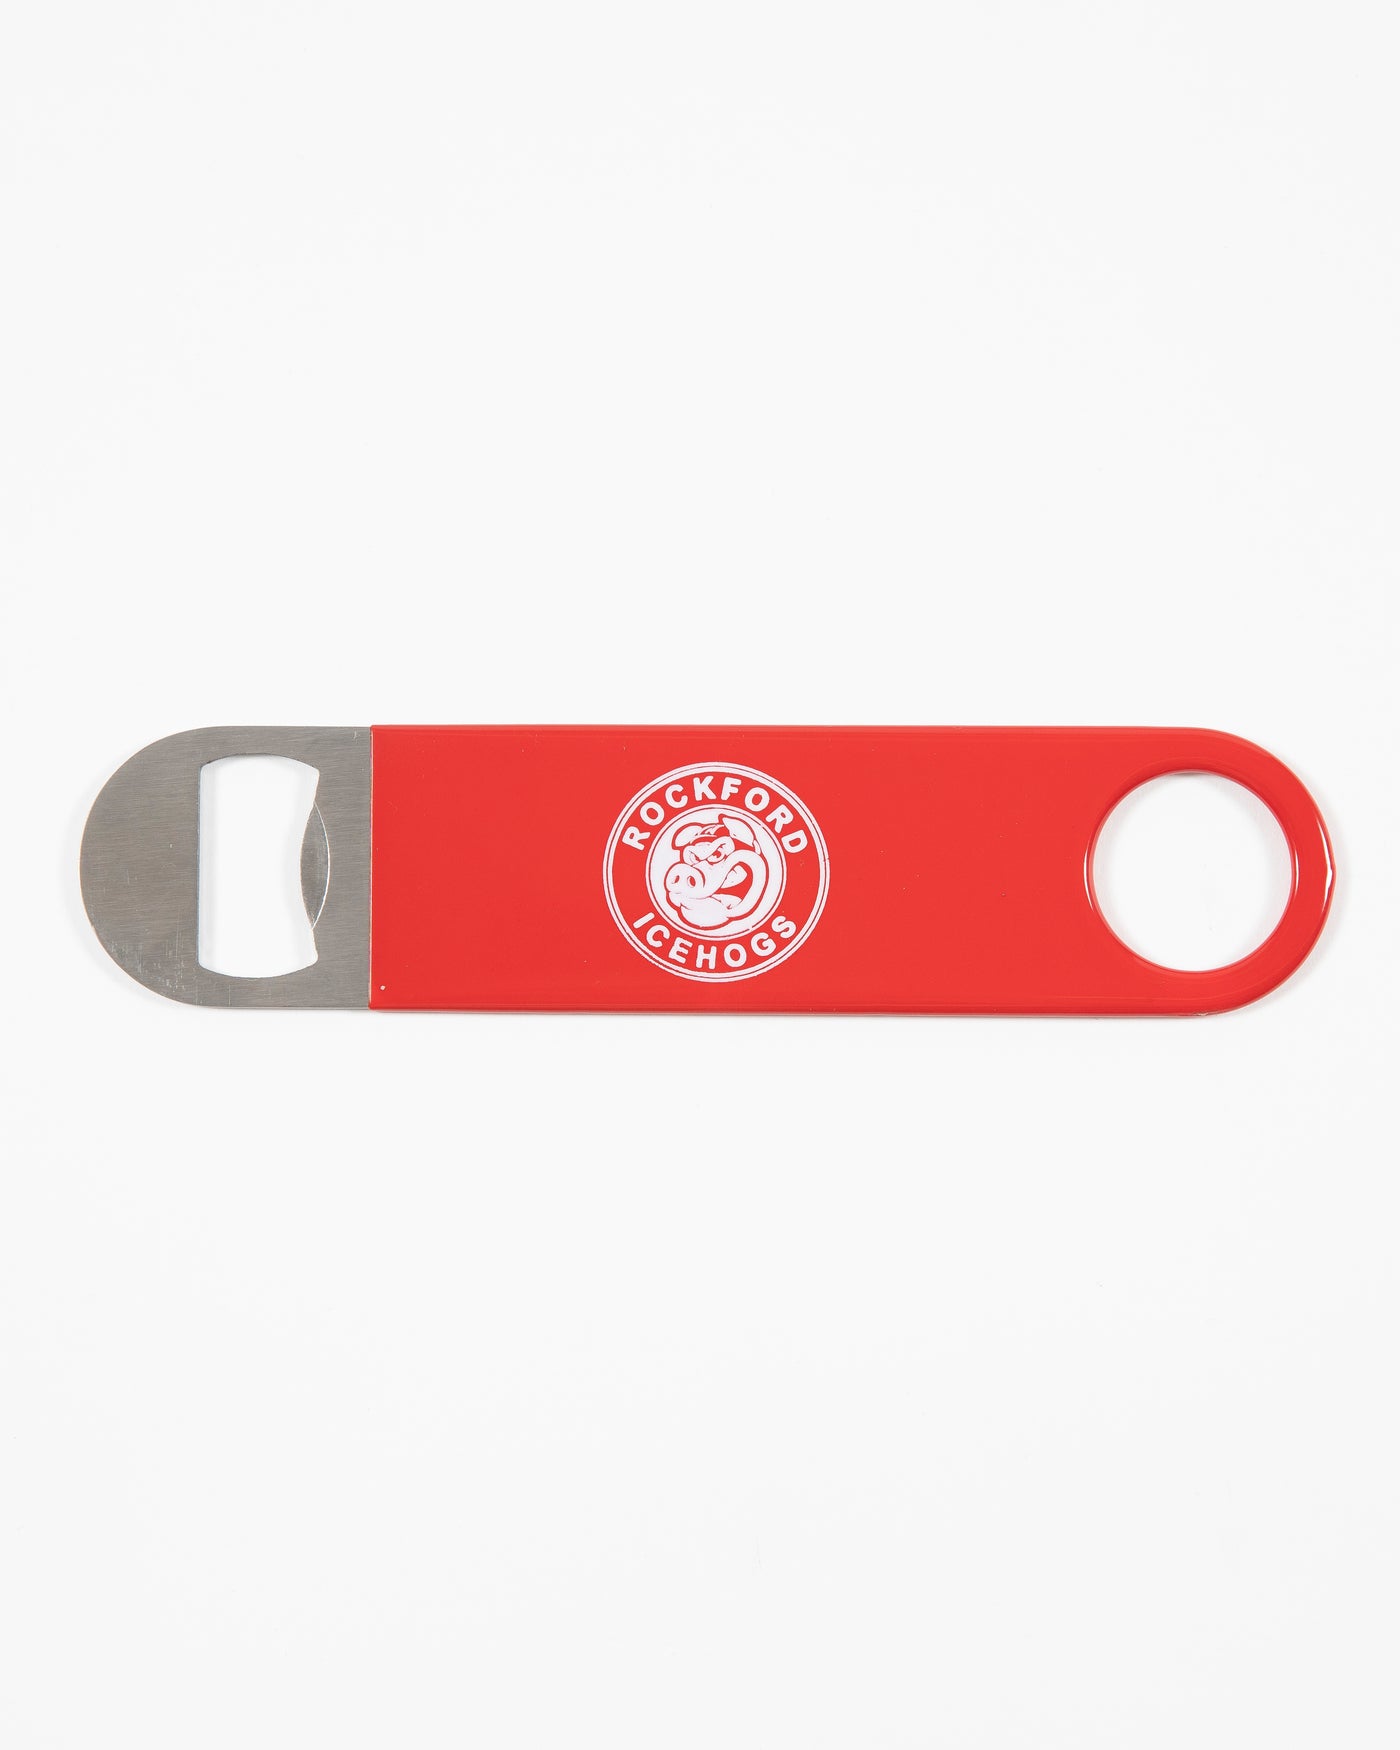 Red Rockford IceHogs metal bottle opener with logo on front - lay flat